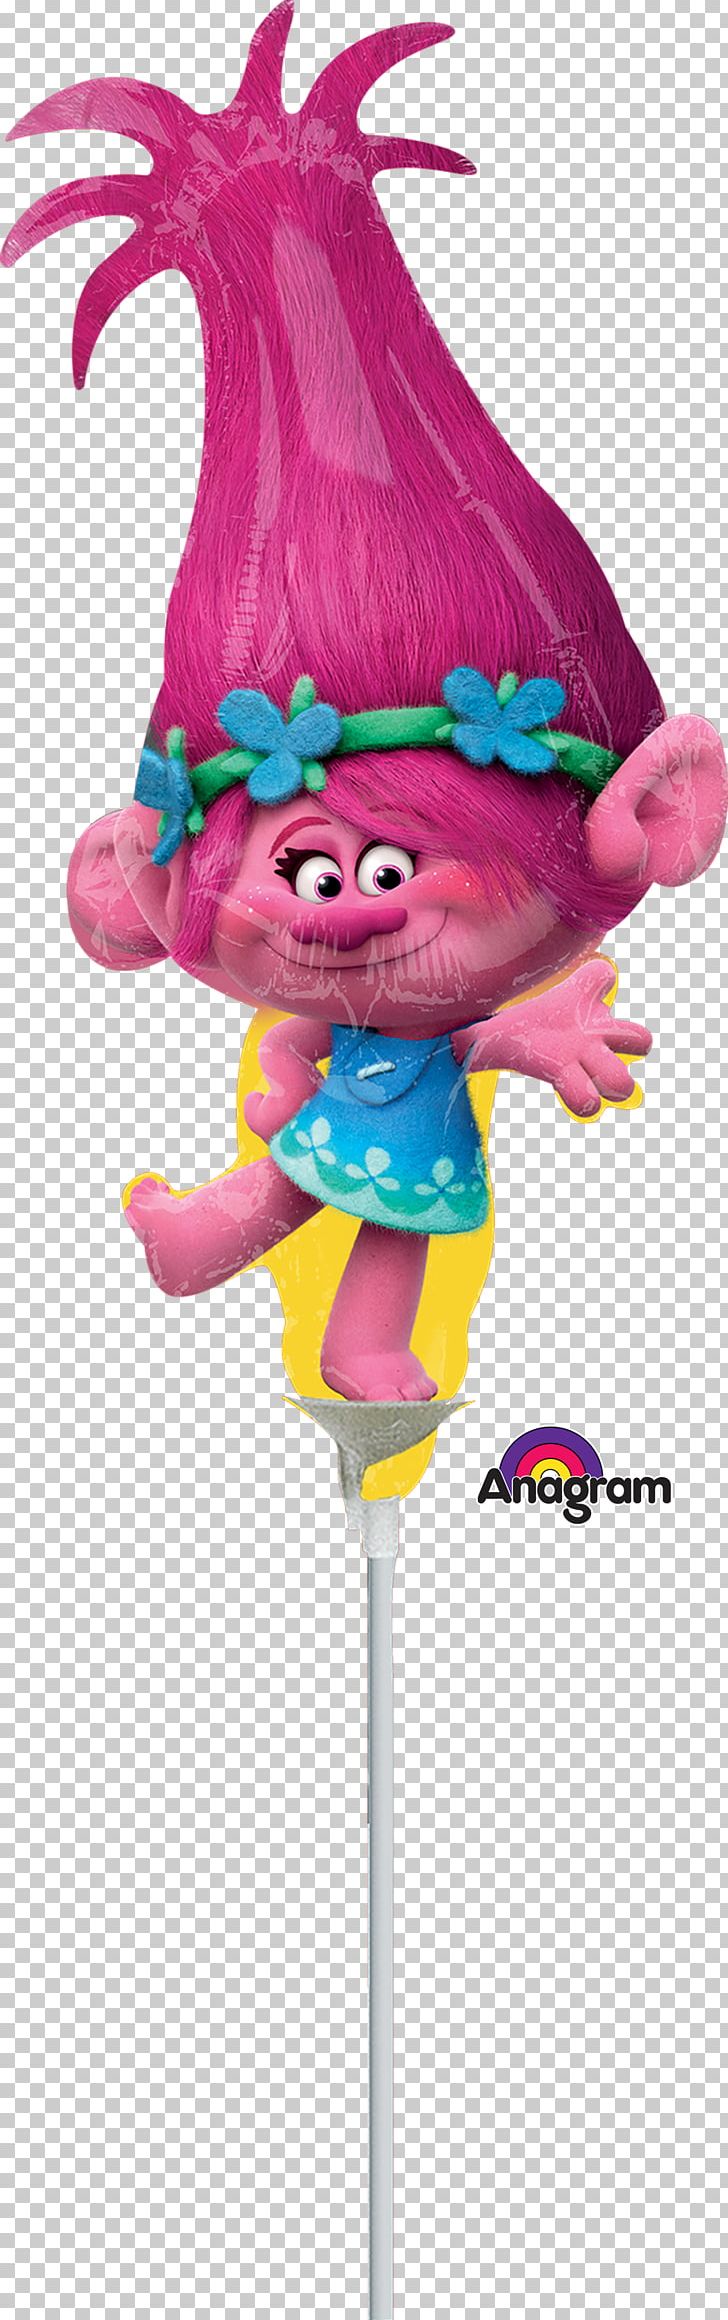 Balloon Troll Doll Trolls Party PNG, Clipart, Bag, Balloon, Birthday, Doll, Inflatable Free PNG Download